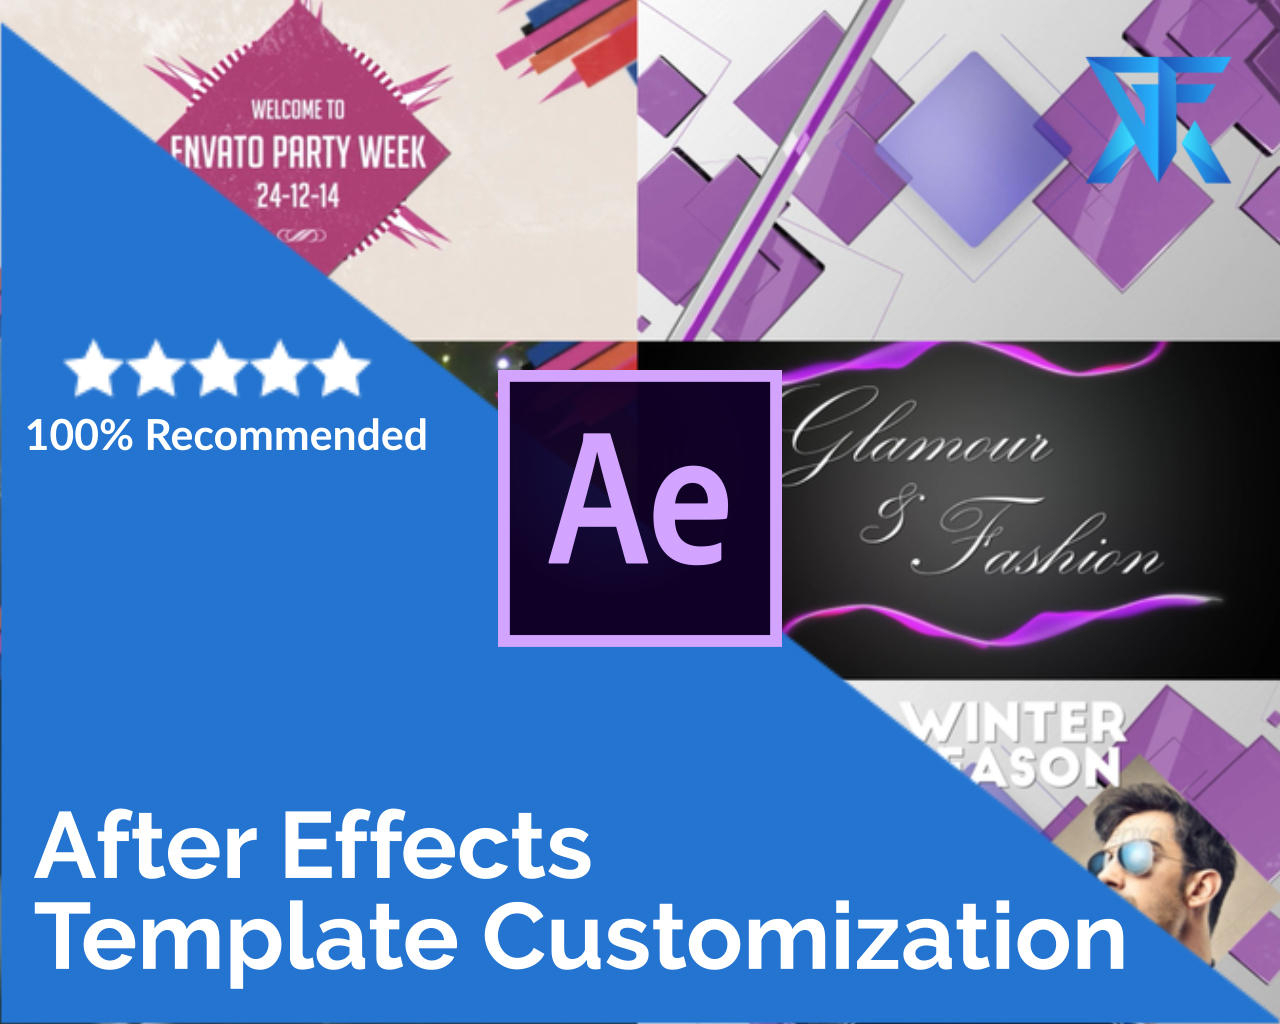 envato templates after effects free download